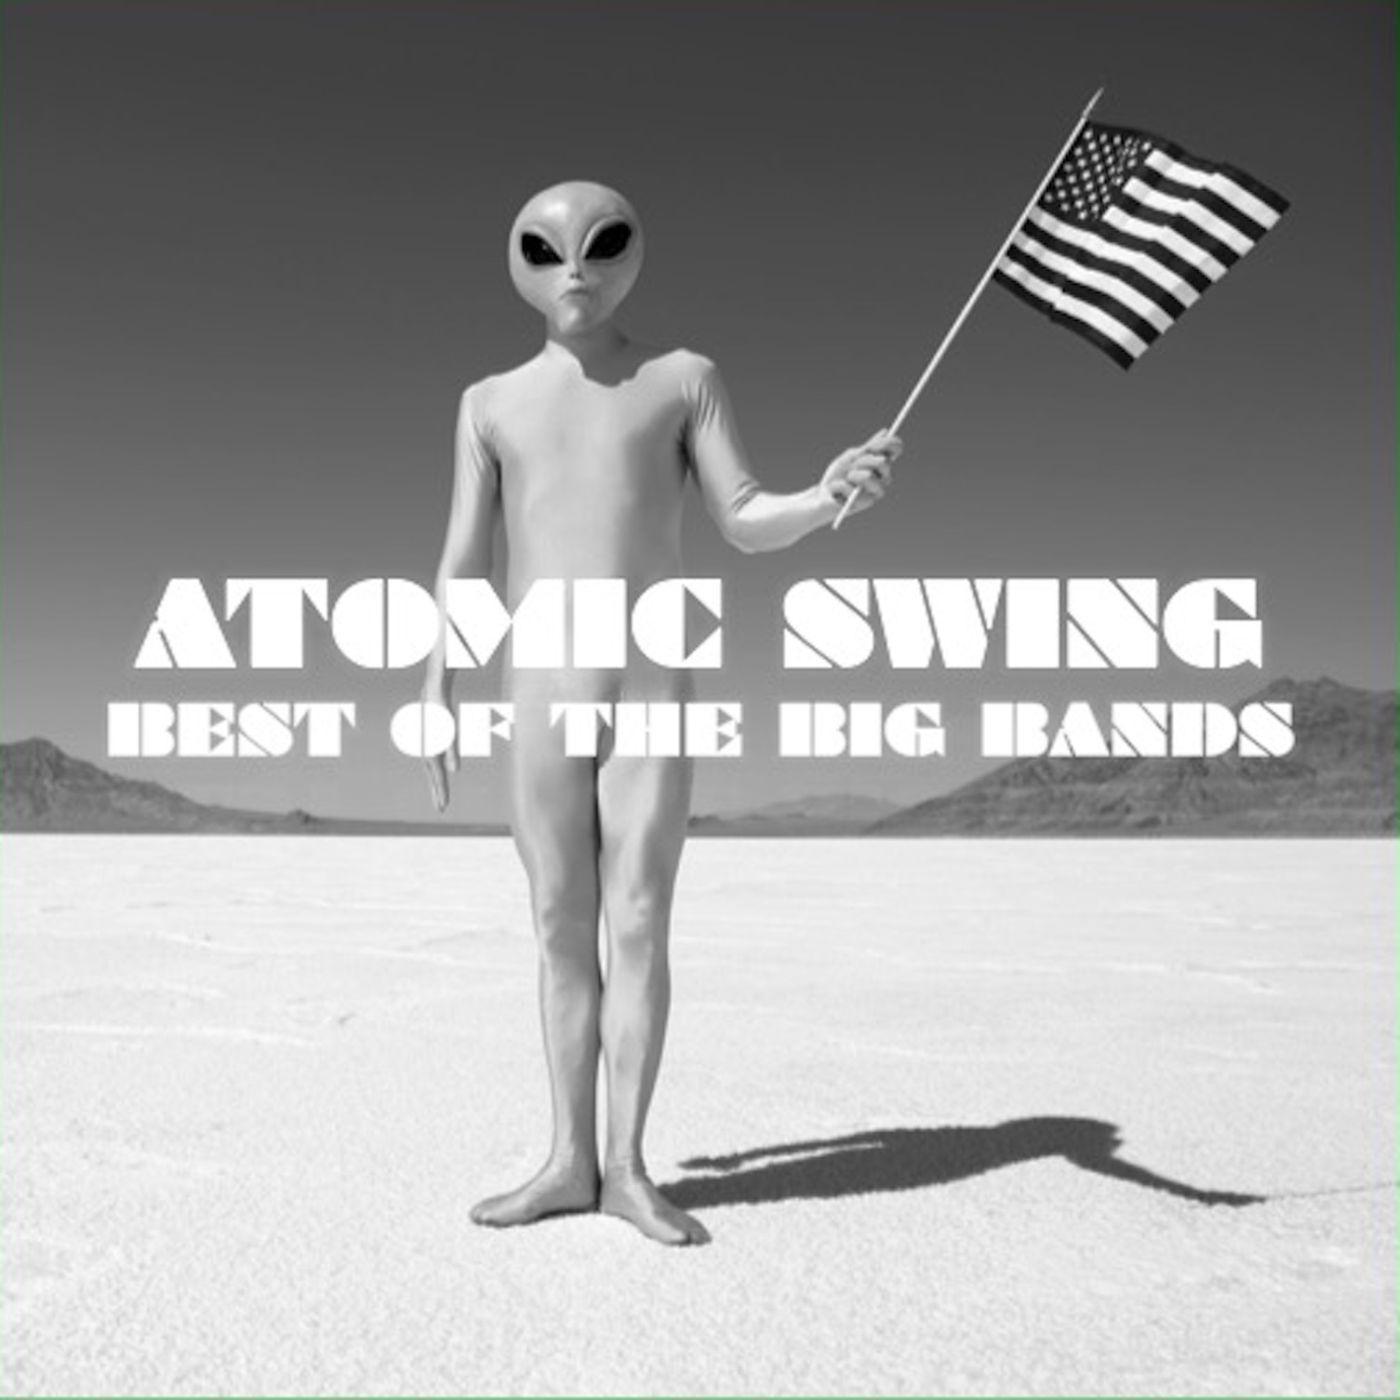 Atomic Swing Best Of The Big Bands